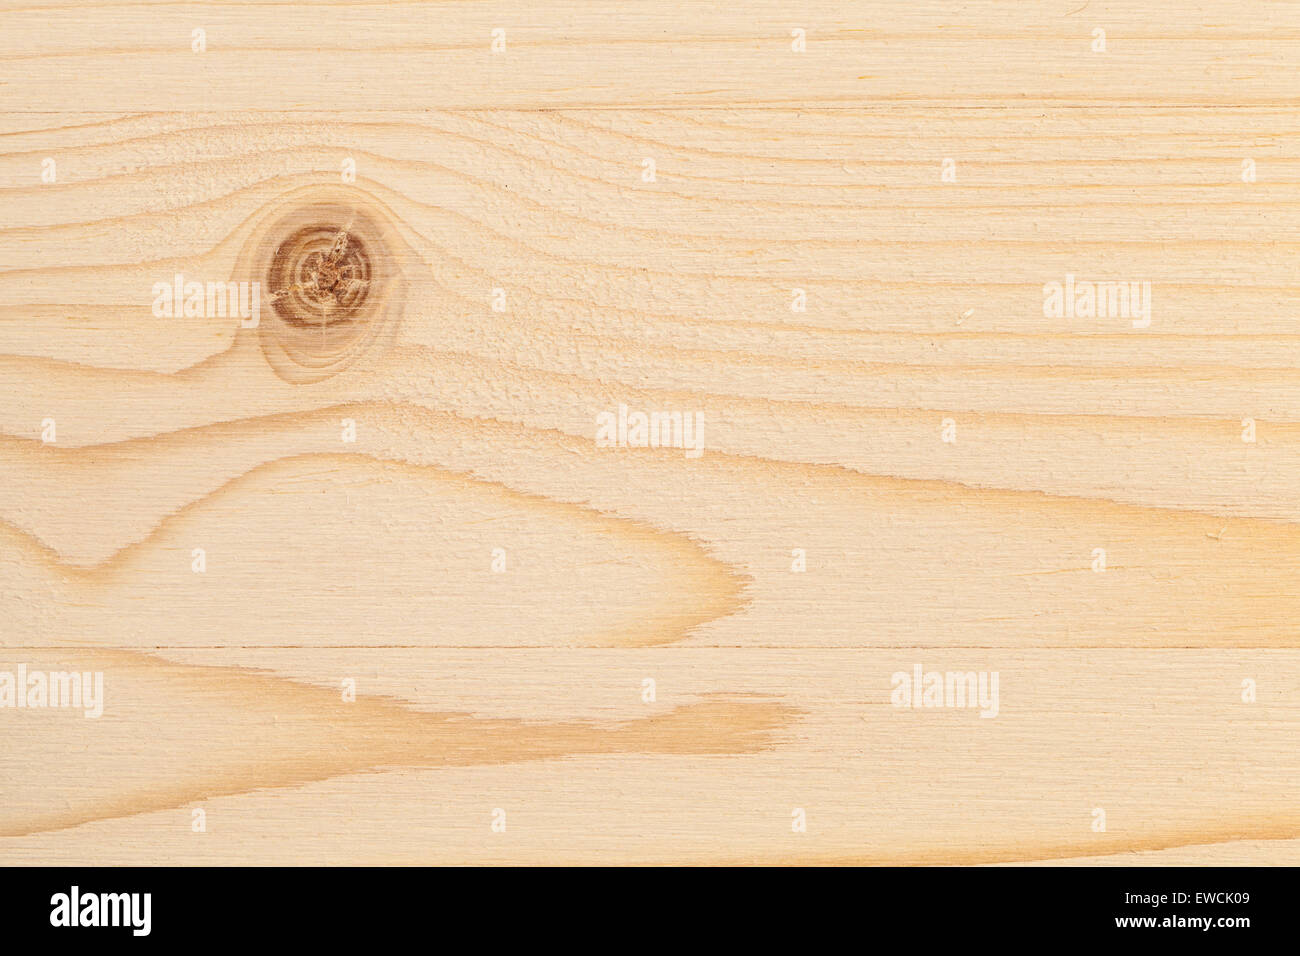 Background texture of new wooden board with knot and natural pattern lines Stock Photo